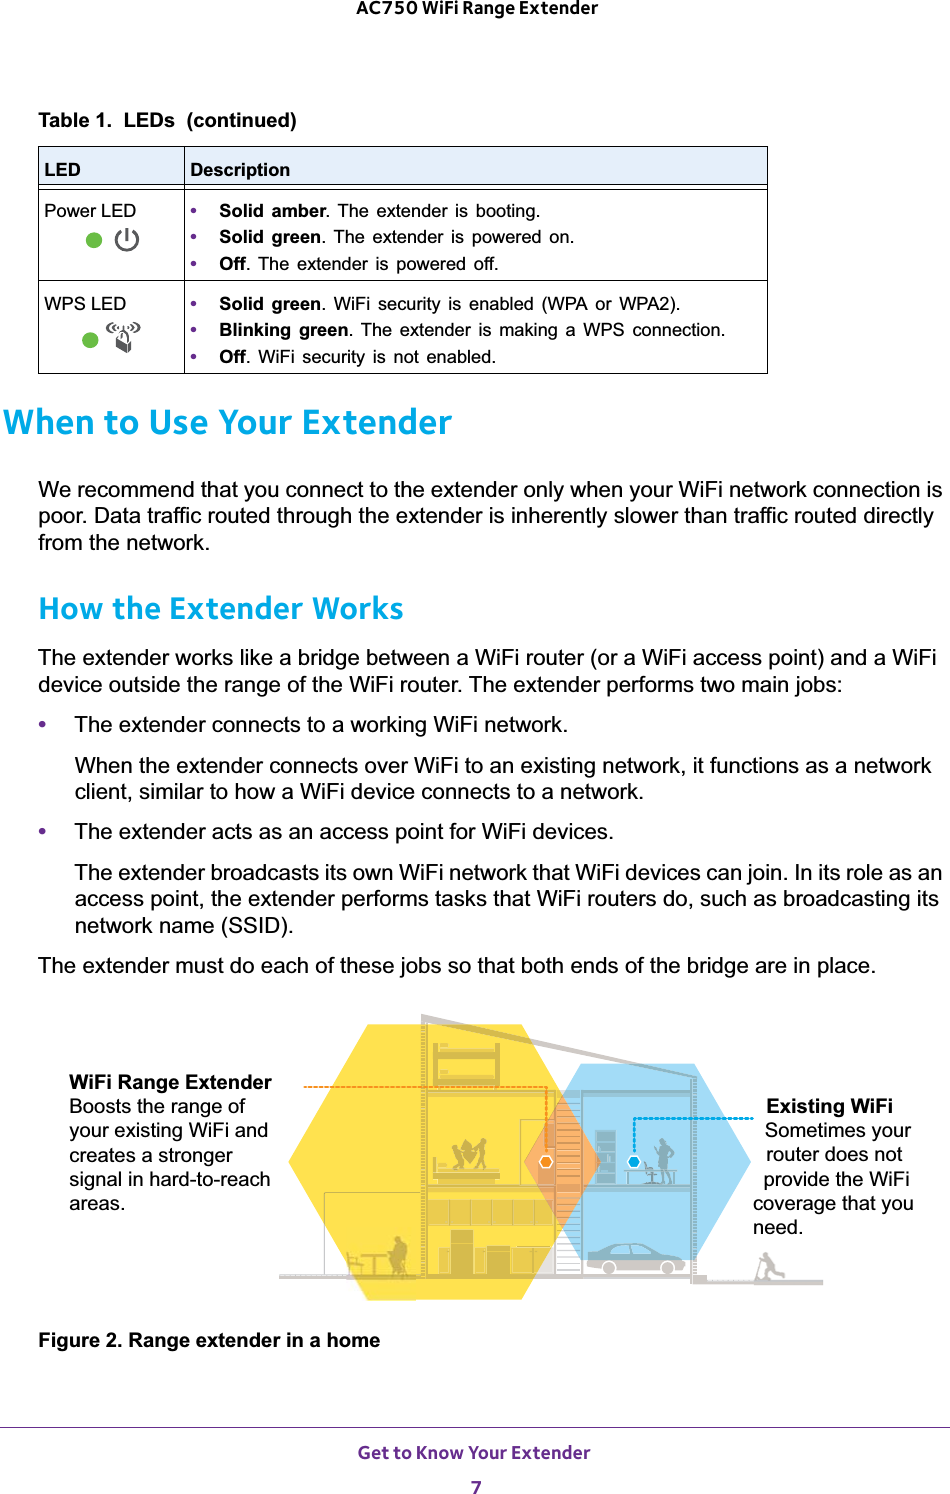 Get to Know Your Extender 7 AC750 WiFi Range ExtenderWhen to Use Your ExtenderWe recommend that you connect to the extender only when your WiFi network connection is poor. Data traffic routed through the extender is inherently slower than traffic routed directly from the network.How the Extender WorksThe extender works like a bridge between a WiFi router (or a WiFi access point) and a WiFi device outside the range of the WiFi router. The extender performs two main jobs:•The extender connects to a working WiFi network.When the extender connects over WiFi to an existing network, it functions as a network client, similar to how a WiFi device connects to a network.•The extender acts as an access point for WiFi devices. The extender broadcasts its own WiFi network that WiFi devices can join. In its role as an access point, the extender performs tasks that WiFi routers do, such as broadcasting its network name (SSID).The extender must do each of these jobs so that both ends of the bridge are in place.Existing WiFi Sometimes your router does not provide the WiFi coverage that you need.WiFi Range Extender Boosts the range of your existing WiFi and creates a stronger signal in hard-to-reach areas.Figure 2. Range extender in a homePower LED •  Solid amber. The extender is booting.•  Solid green. The extender is powered on.•  Off. The extender is powered off.WPS LED •  Solid green. WiFi security is enabled (WPA or WPA2).•  Blinking green. The extender is making a WPS connection.•  Off. WiFi security is not enabled.Table 1.  LEDs  (continued)LED Description